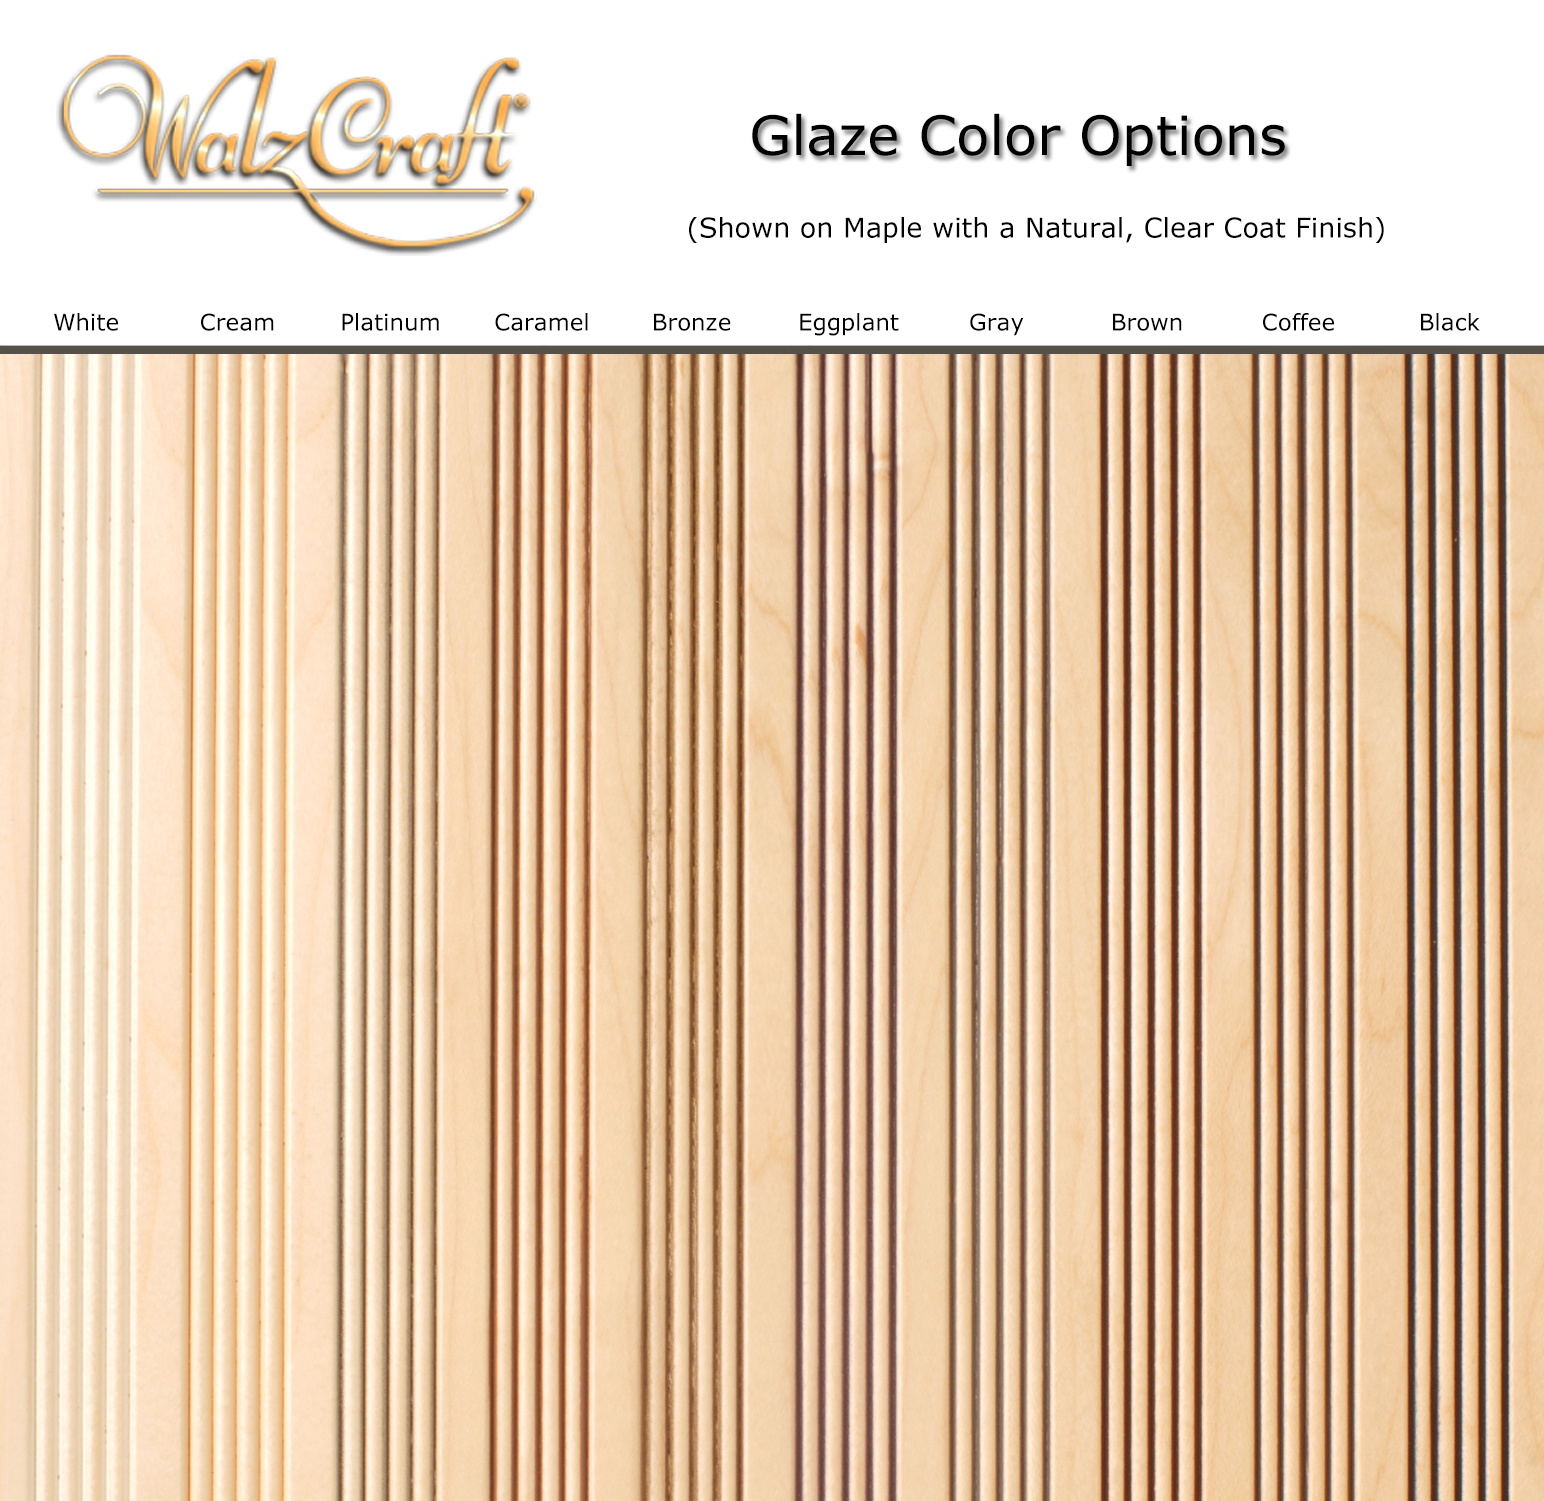 Enlarged View - Glaze Color Options On Maple With A Natural (Clear Coat) Finish